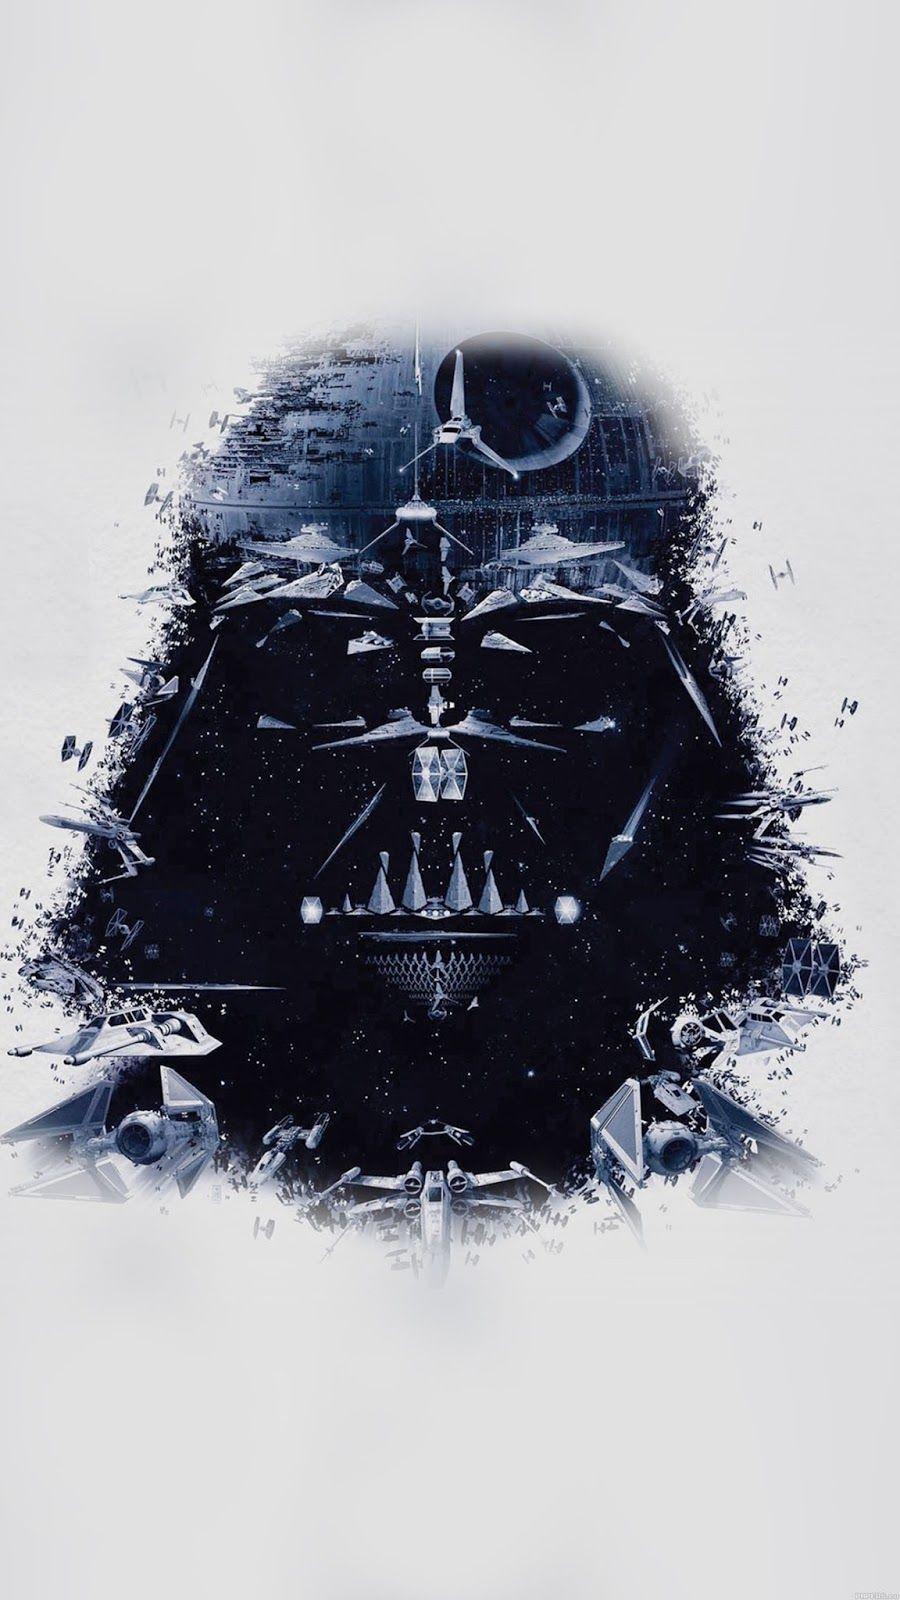 Download Star Wars wallpaper for iPhone Open the Image and save